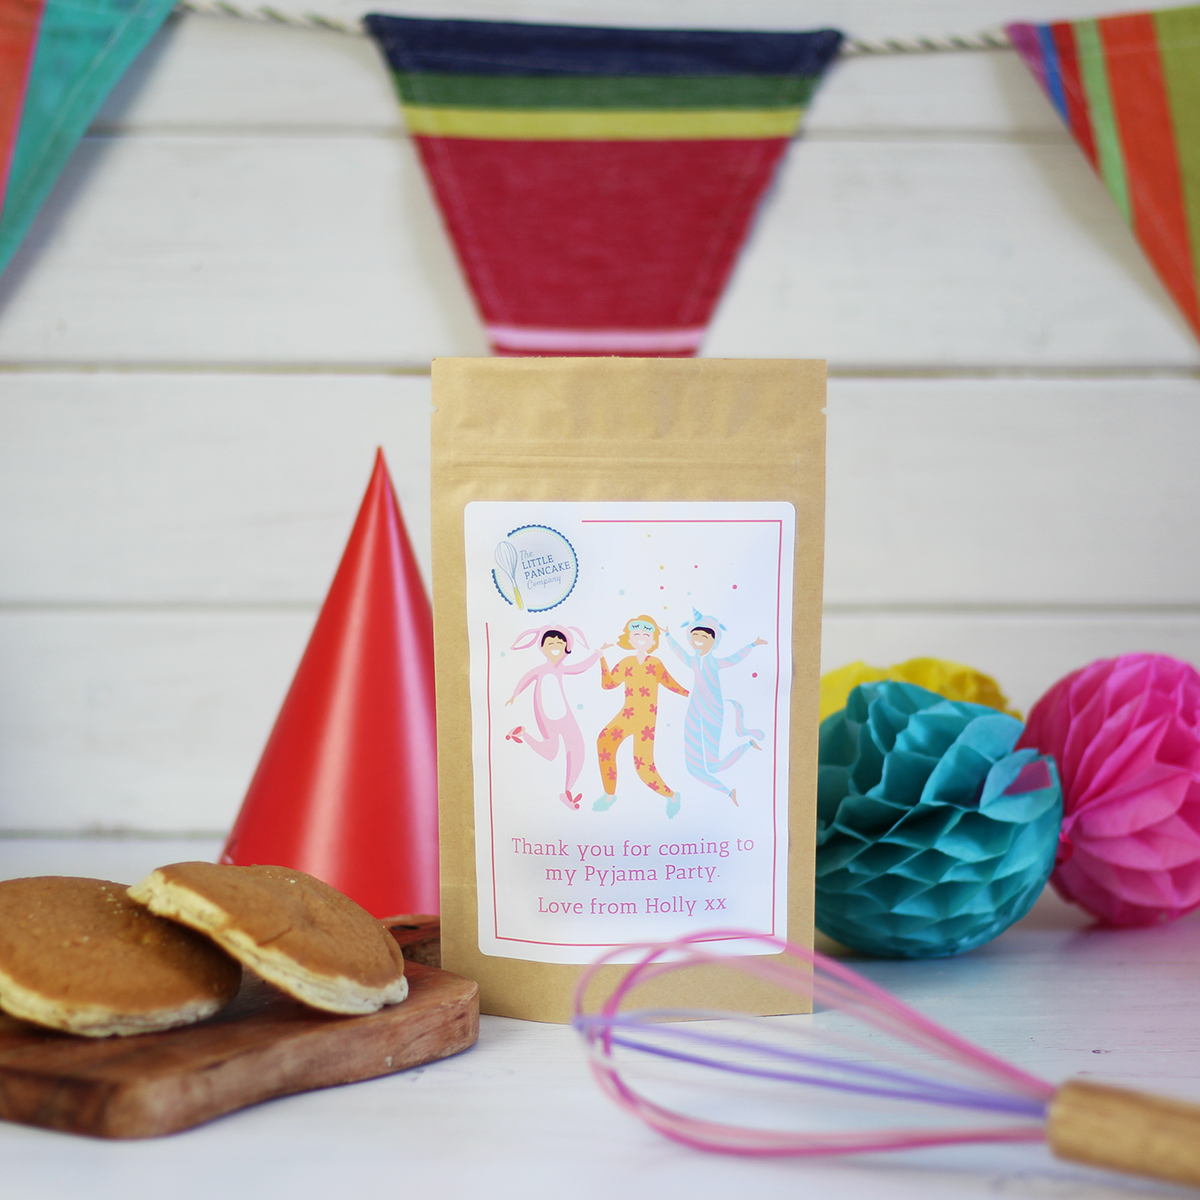 Personalised Pancake Mix Sleepover Party Bags - The Little Pancake Company